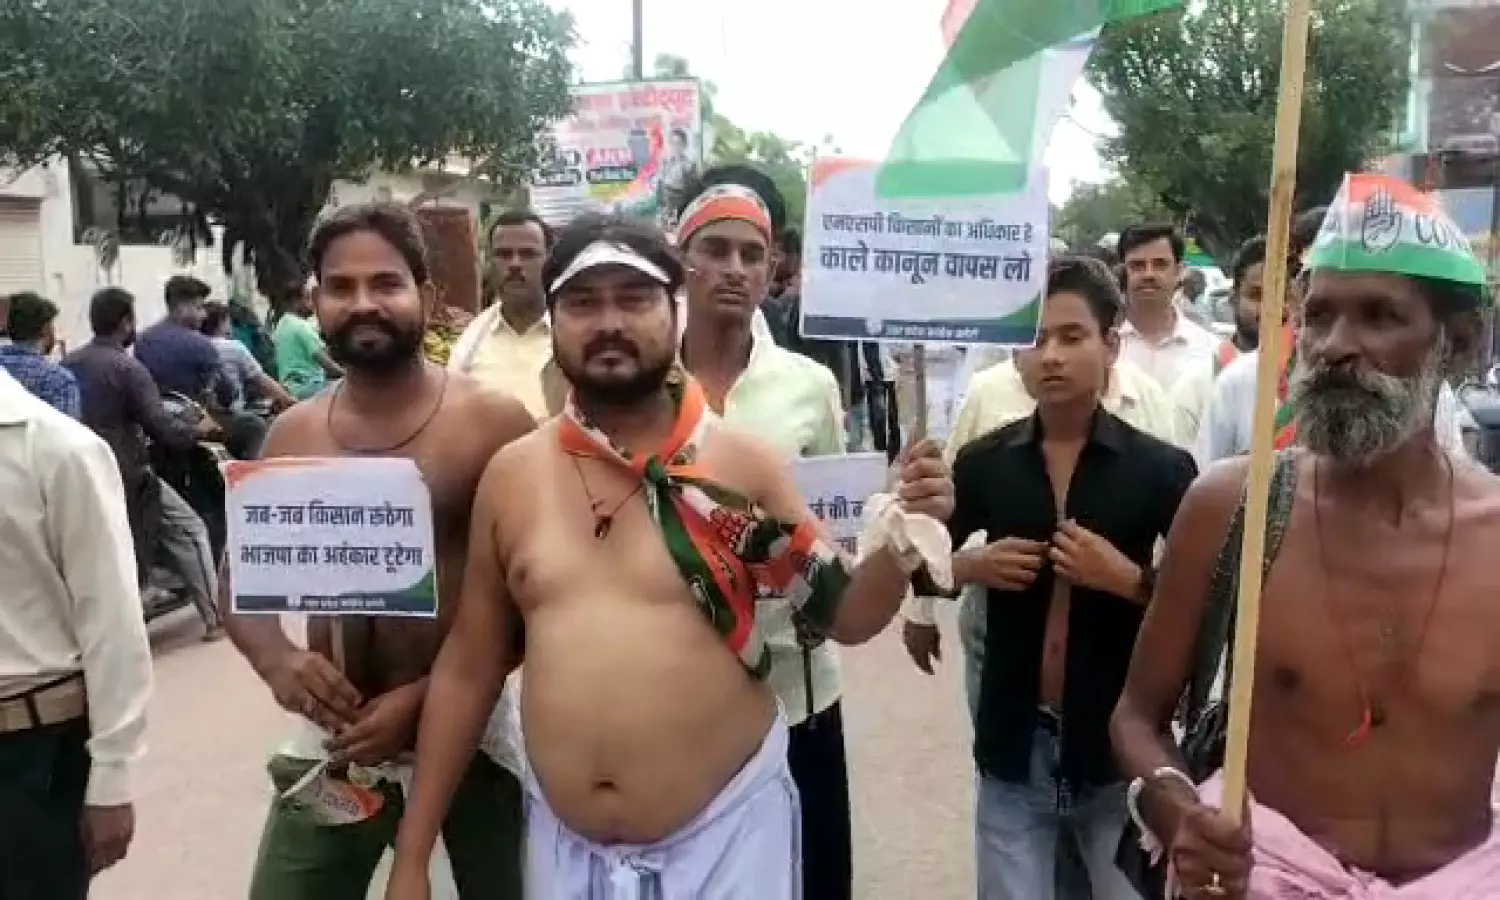 Congress leader protesting with half naked body